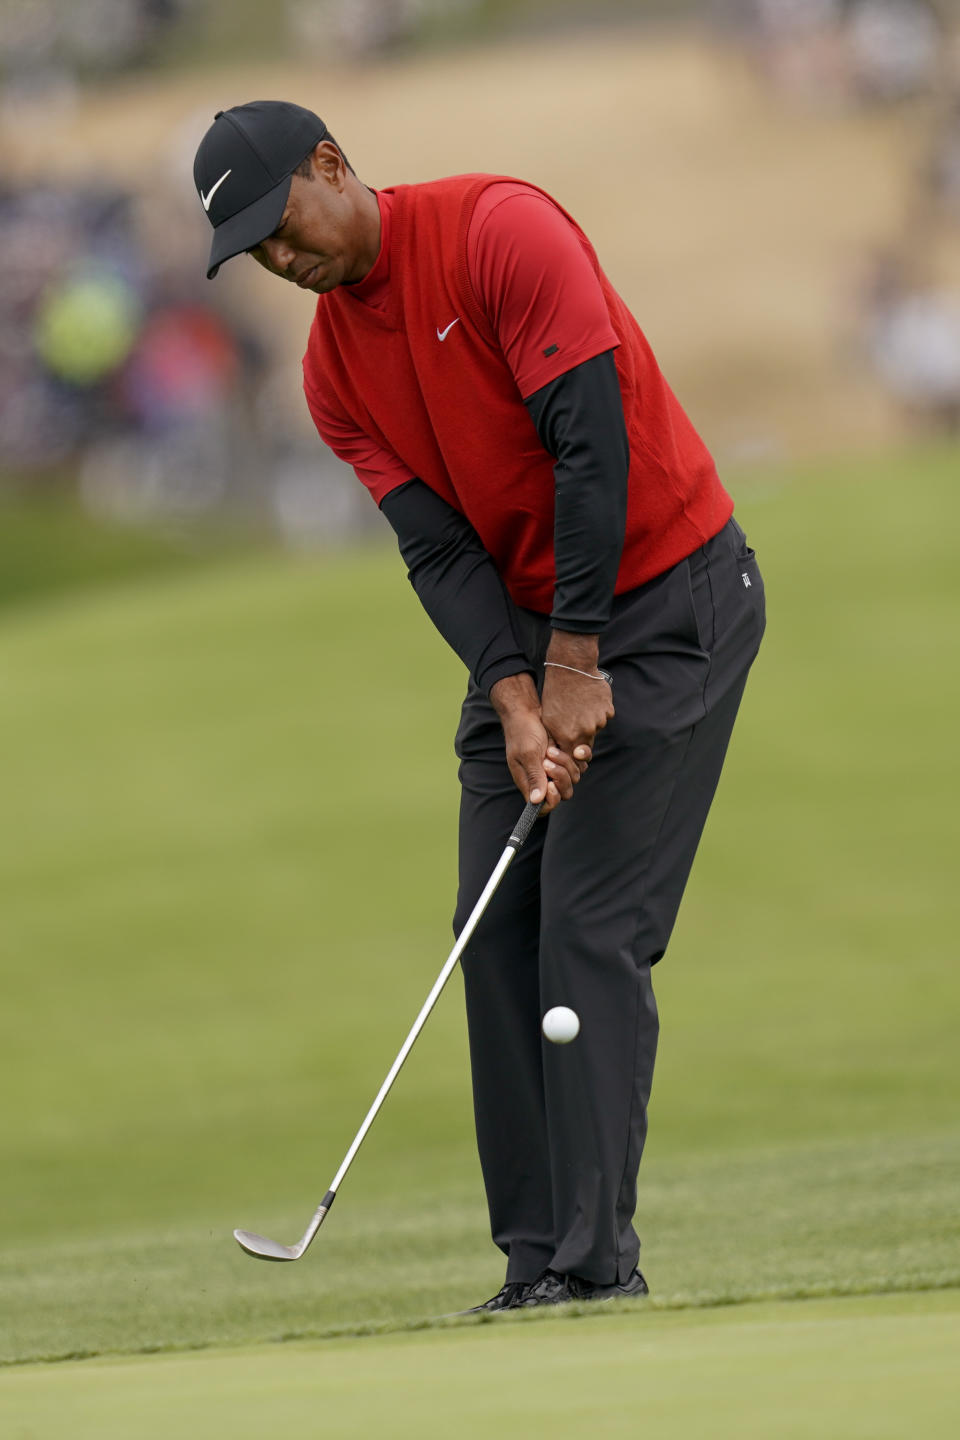 Tiger Woods hits a chip shot on the sixth hole during the final round of the U.S. Open Championship golf tournament Sunday, June 16, 2019, in Pebble Beach, Calif. (AP Photo/David J. Phillip)